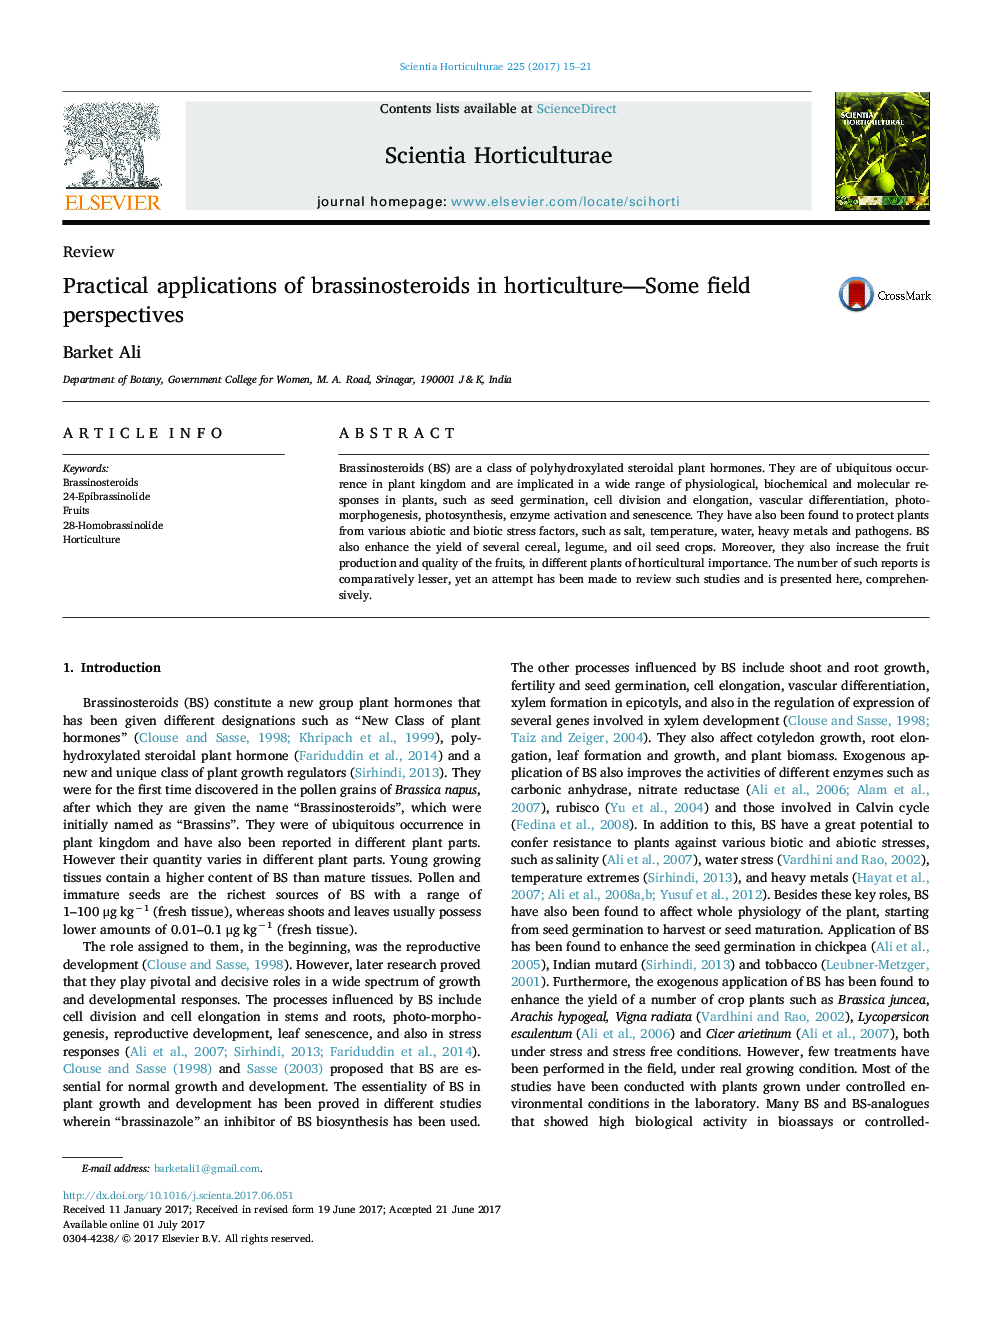 ReviewPractical applications of brassinosteroids in horticulture-Some field perspectives